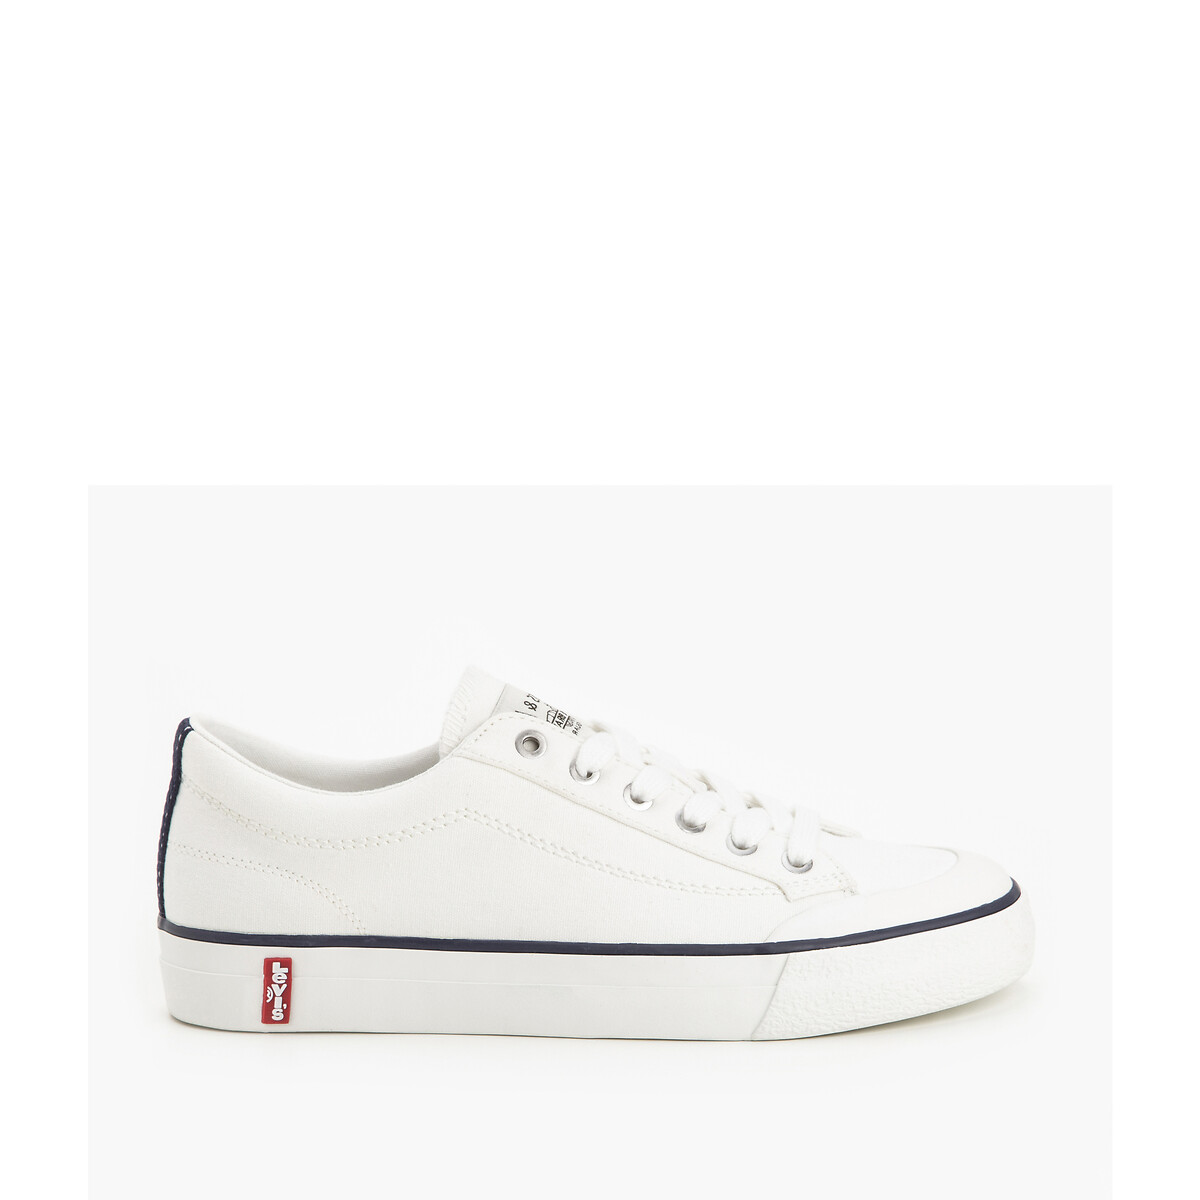 LS2 Low Top Trainers in Canvas